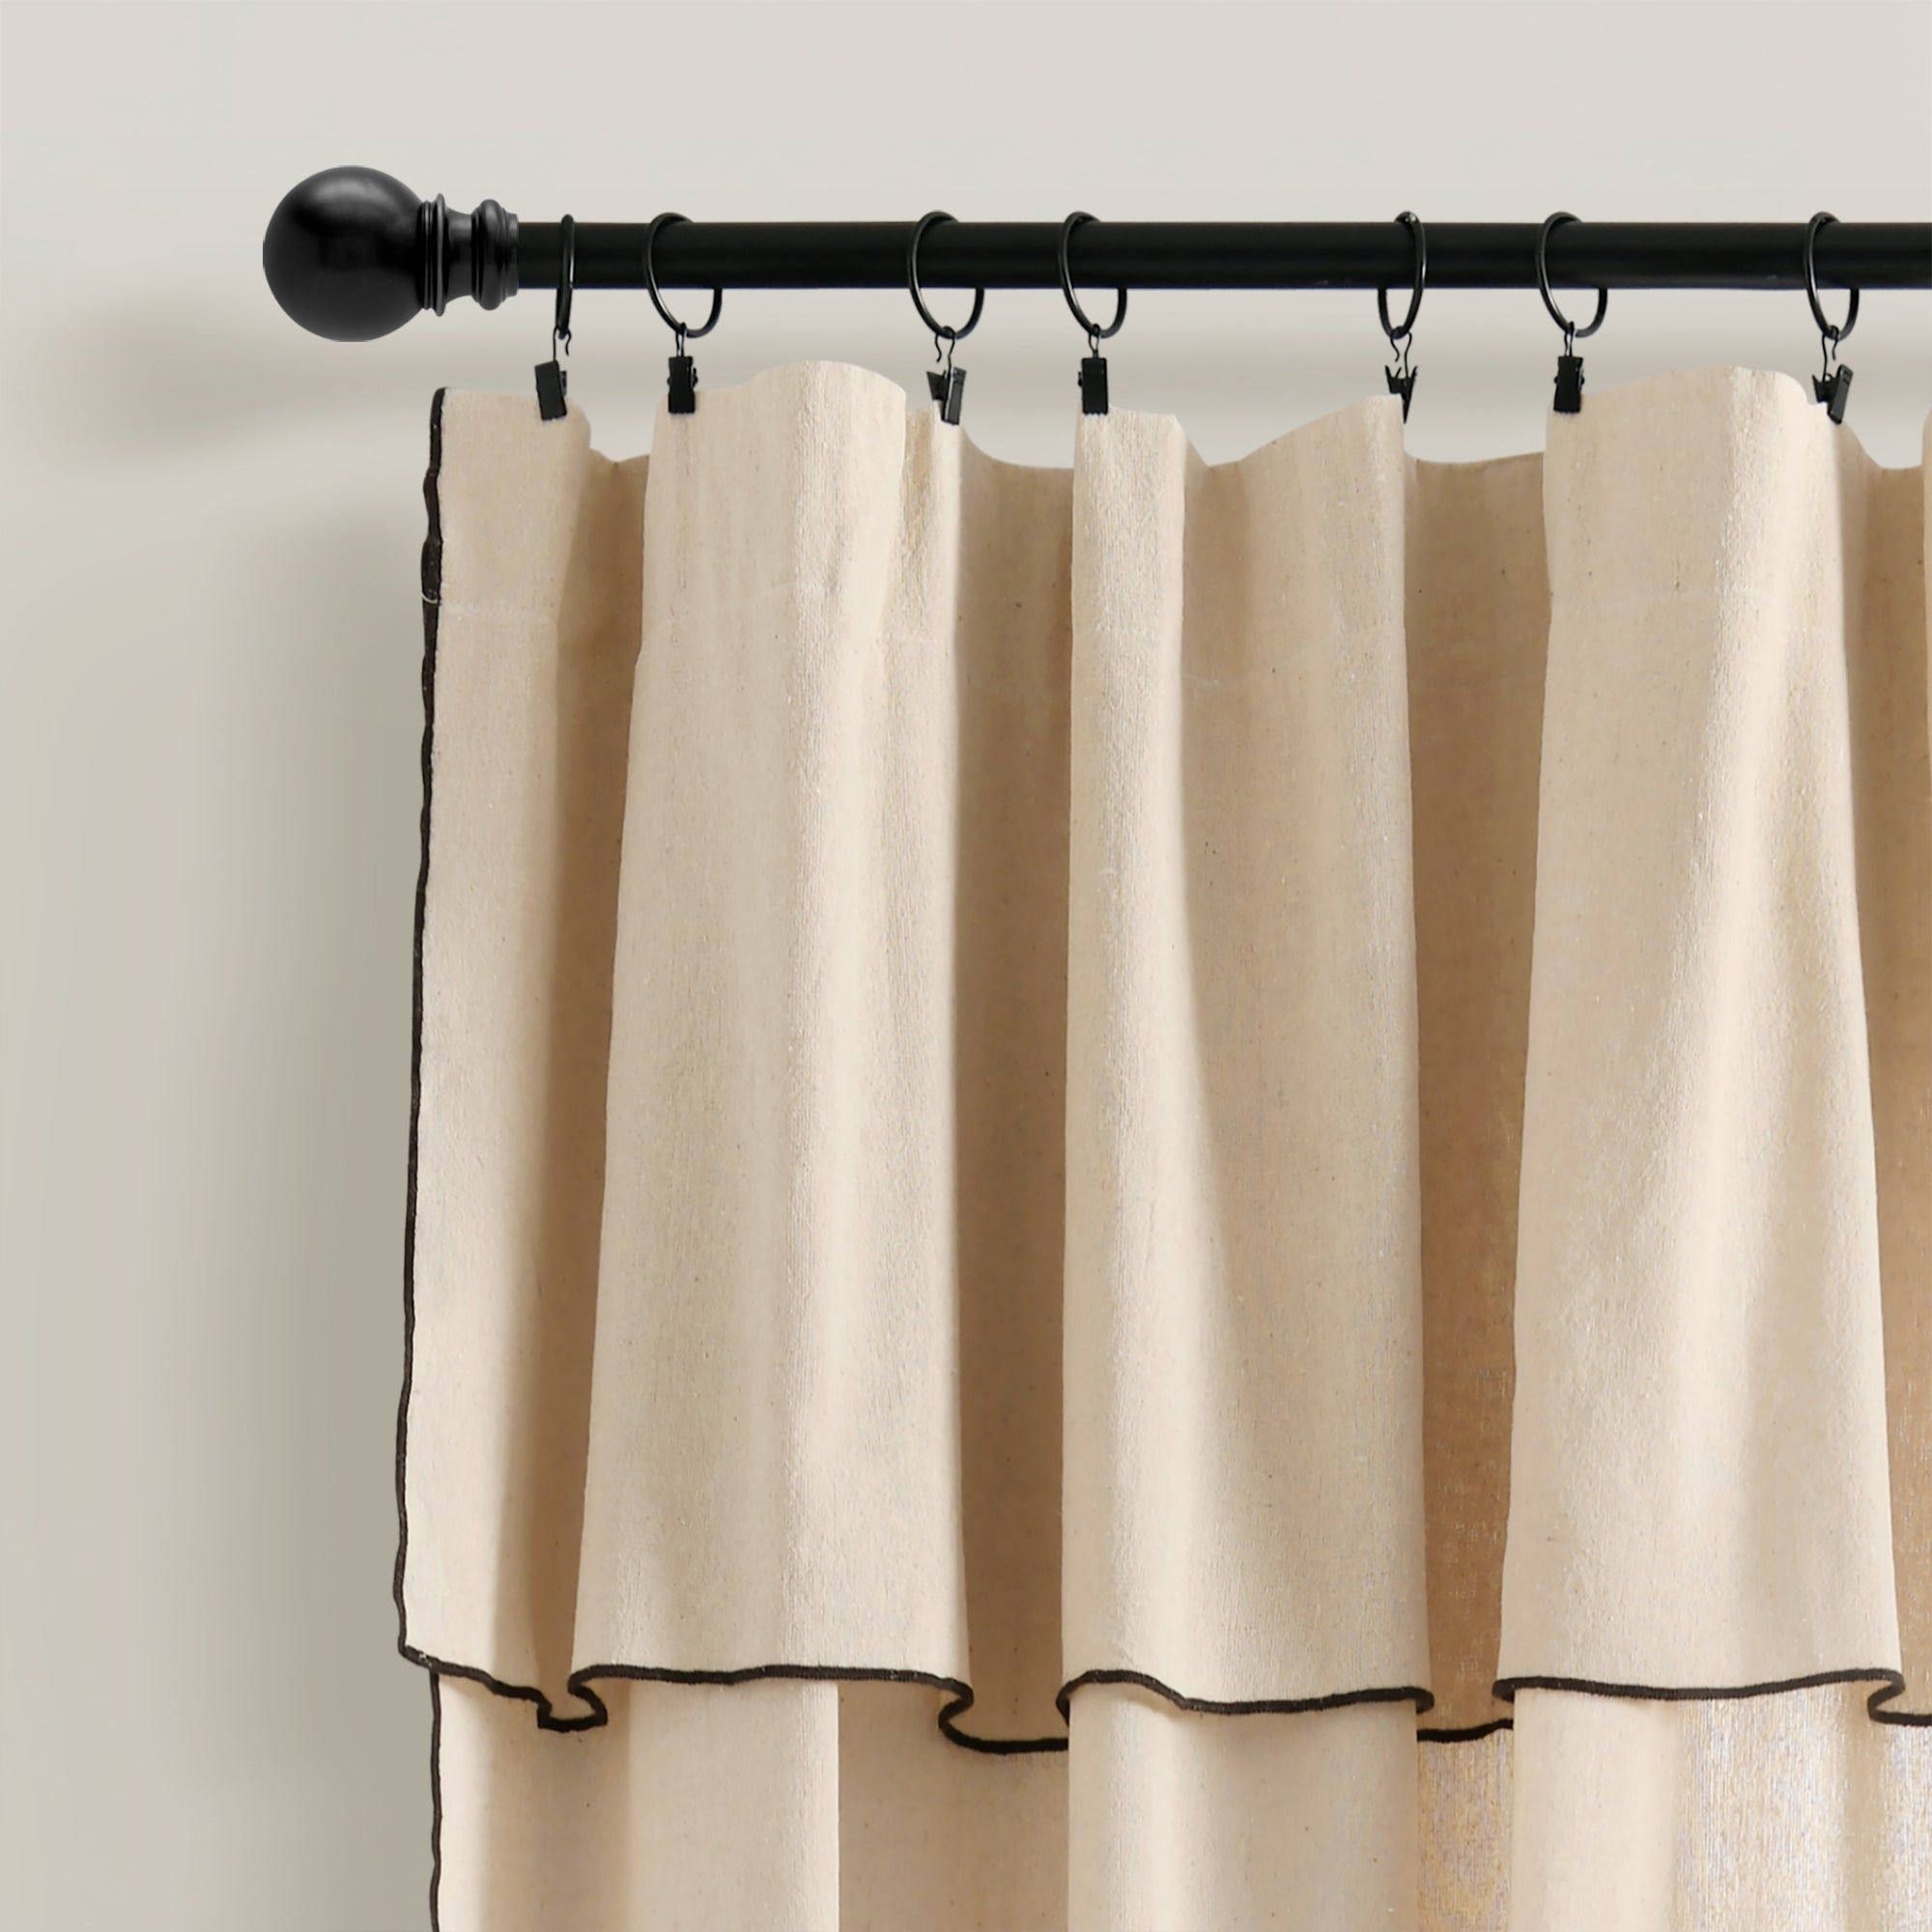 Valance Curtains: Adding Style and Elegance to Your Window Treatments